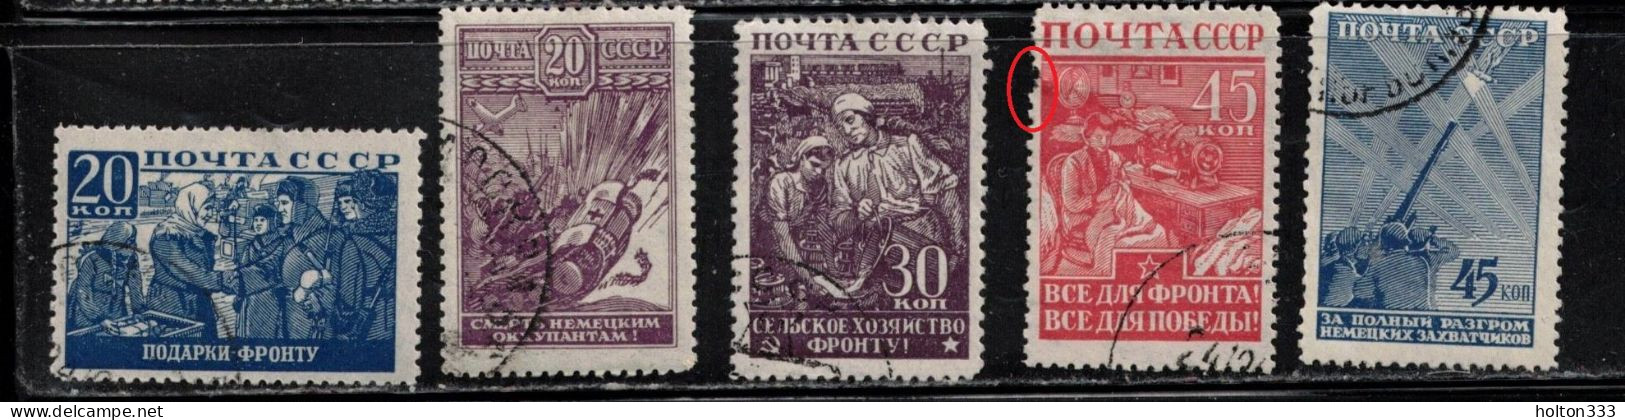 RUSSIA Scott # 873-7 Used - Military Scenes - 1 With Pulled Perf - Used Stamps